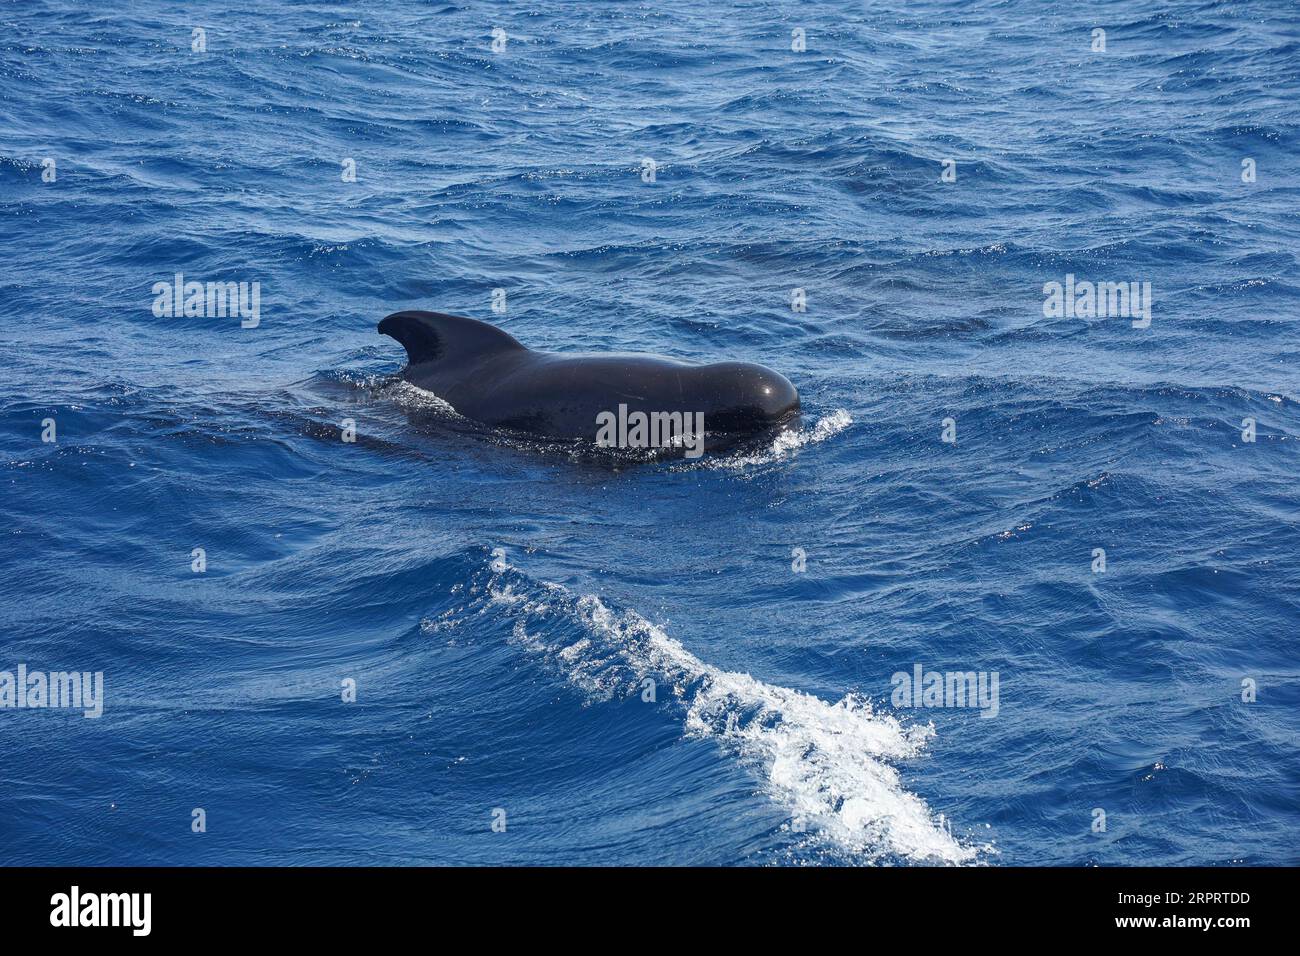 Long-finned pilot whale at Strait of Gibraltar, whale watching, Spain. Stock Photo